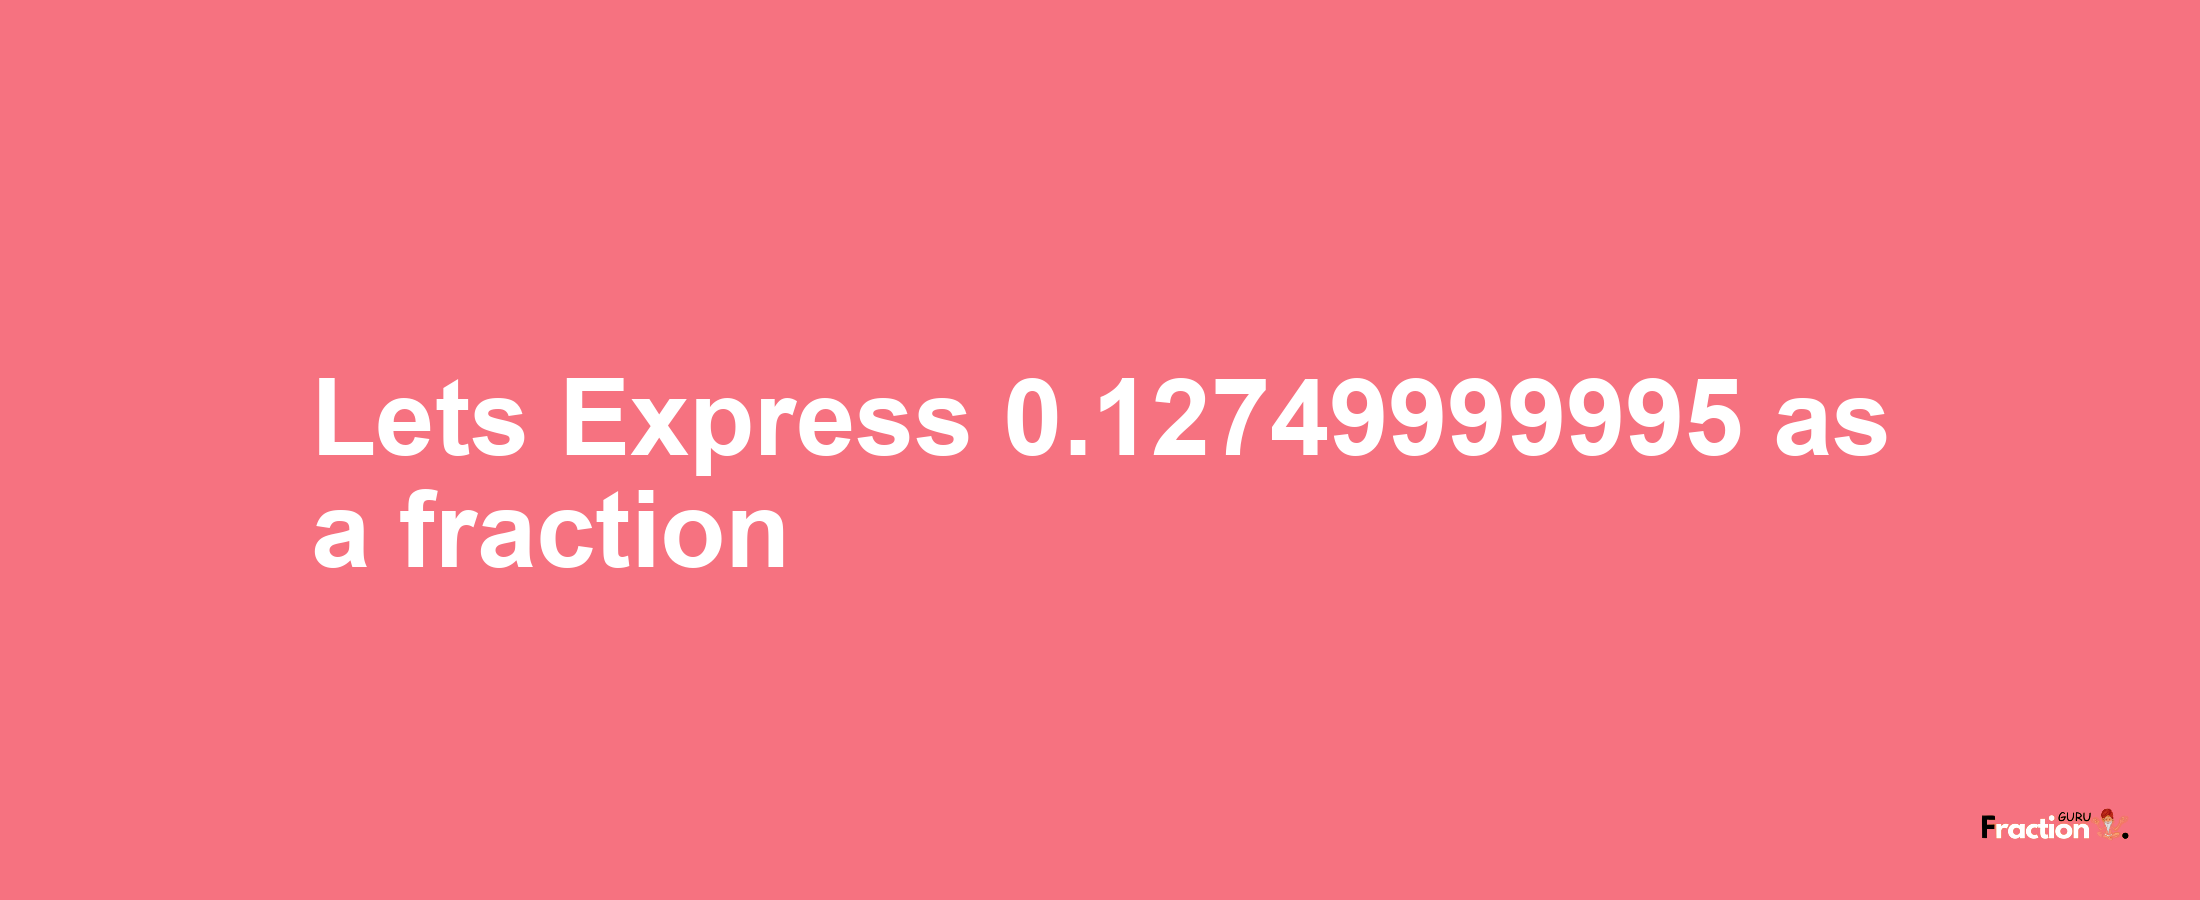 Lets Express 0.12749999995 as afraction